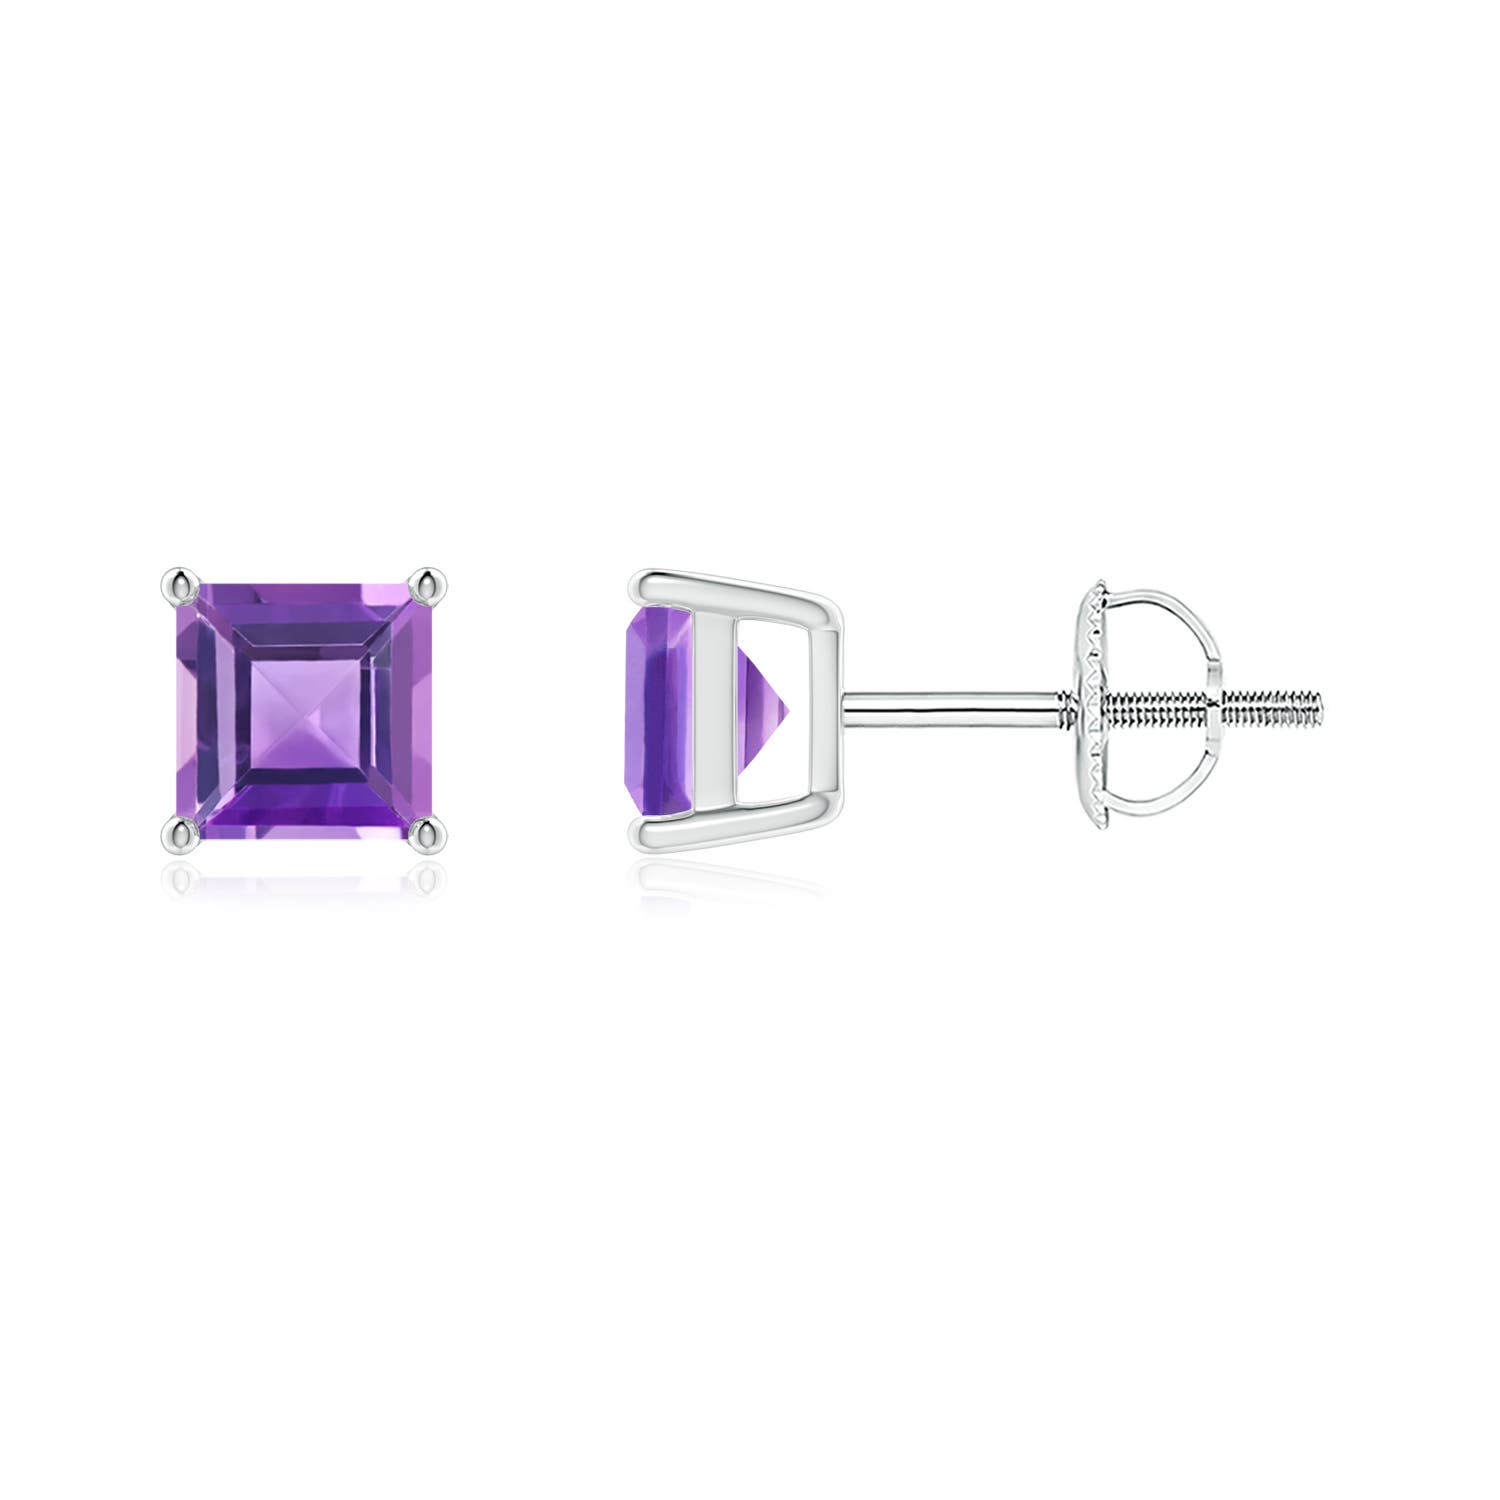 AA - Amethyst / 1.4 CT / 14 KT White Gold